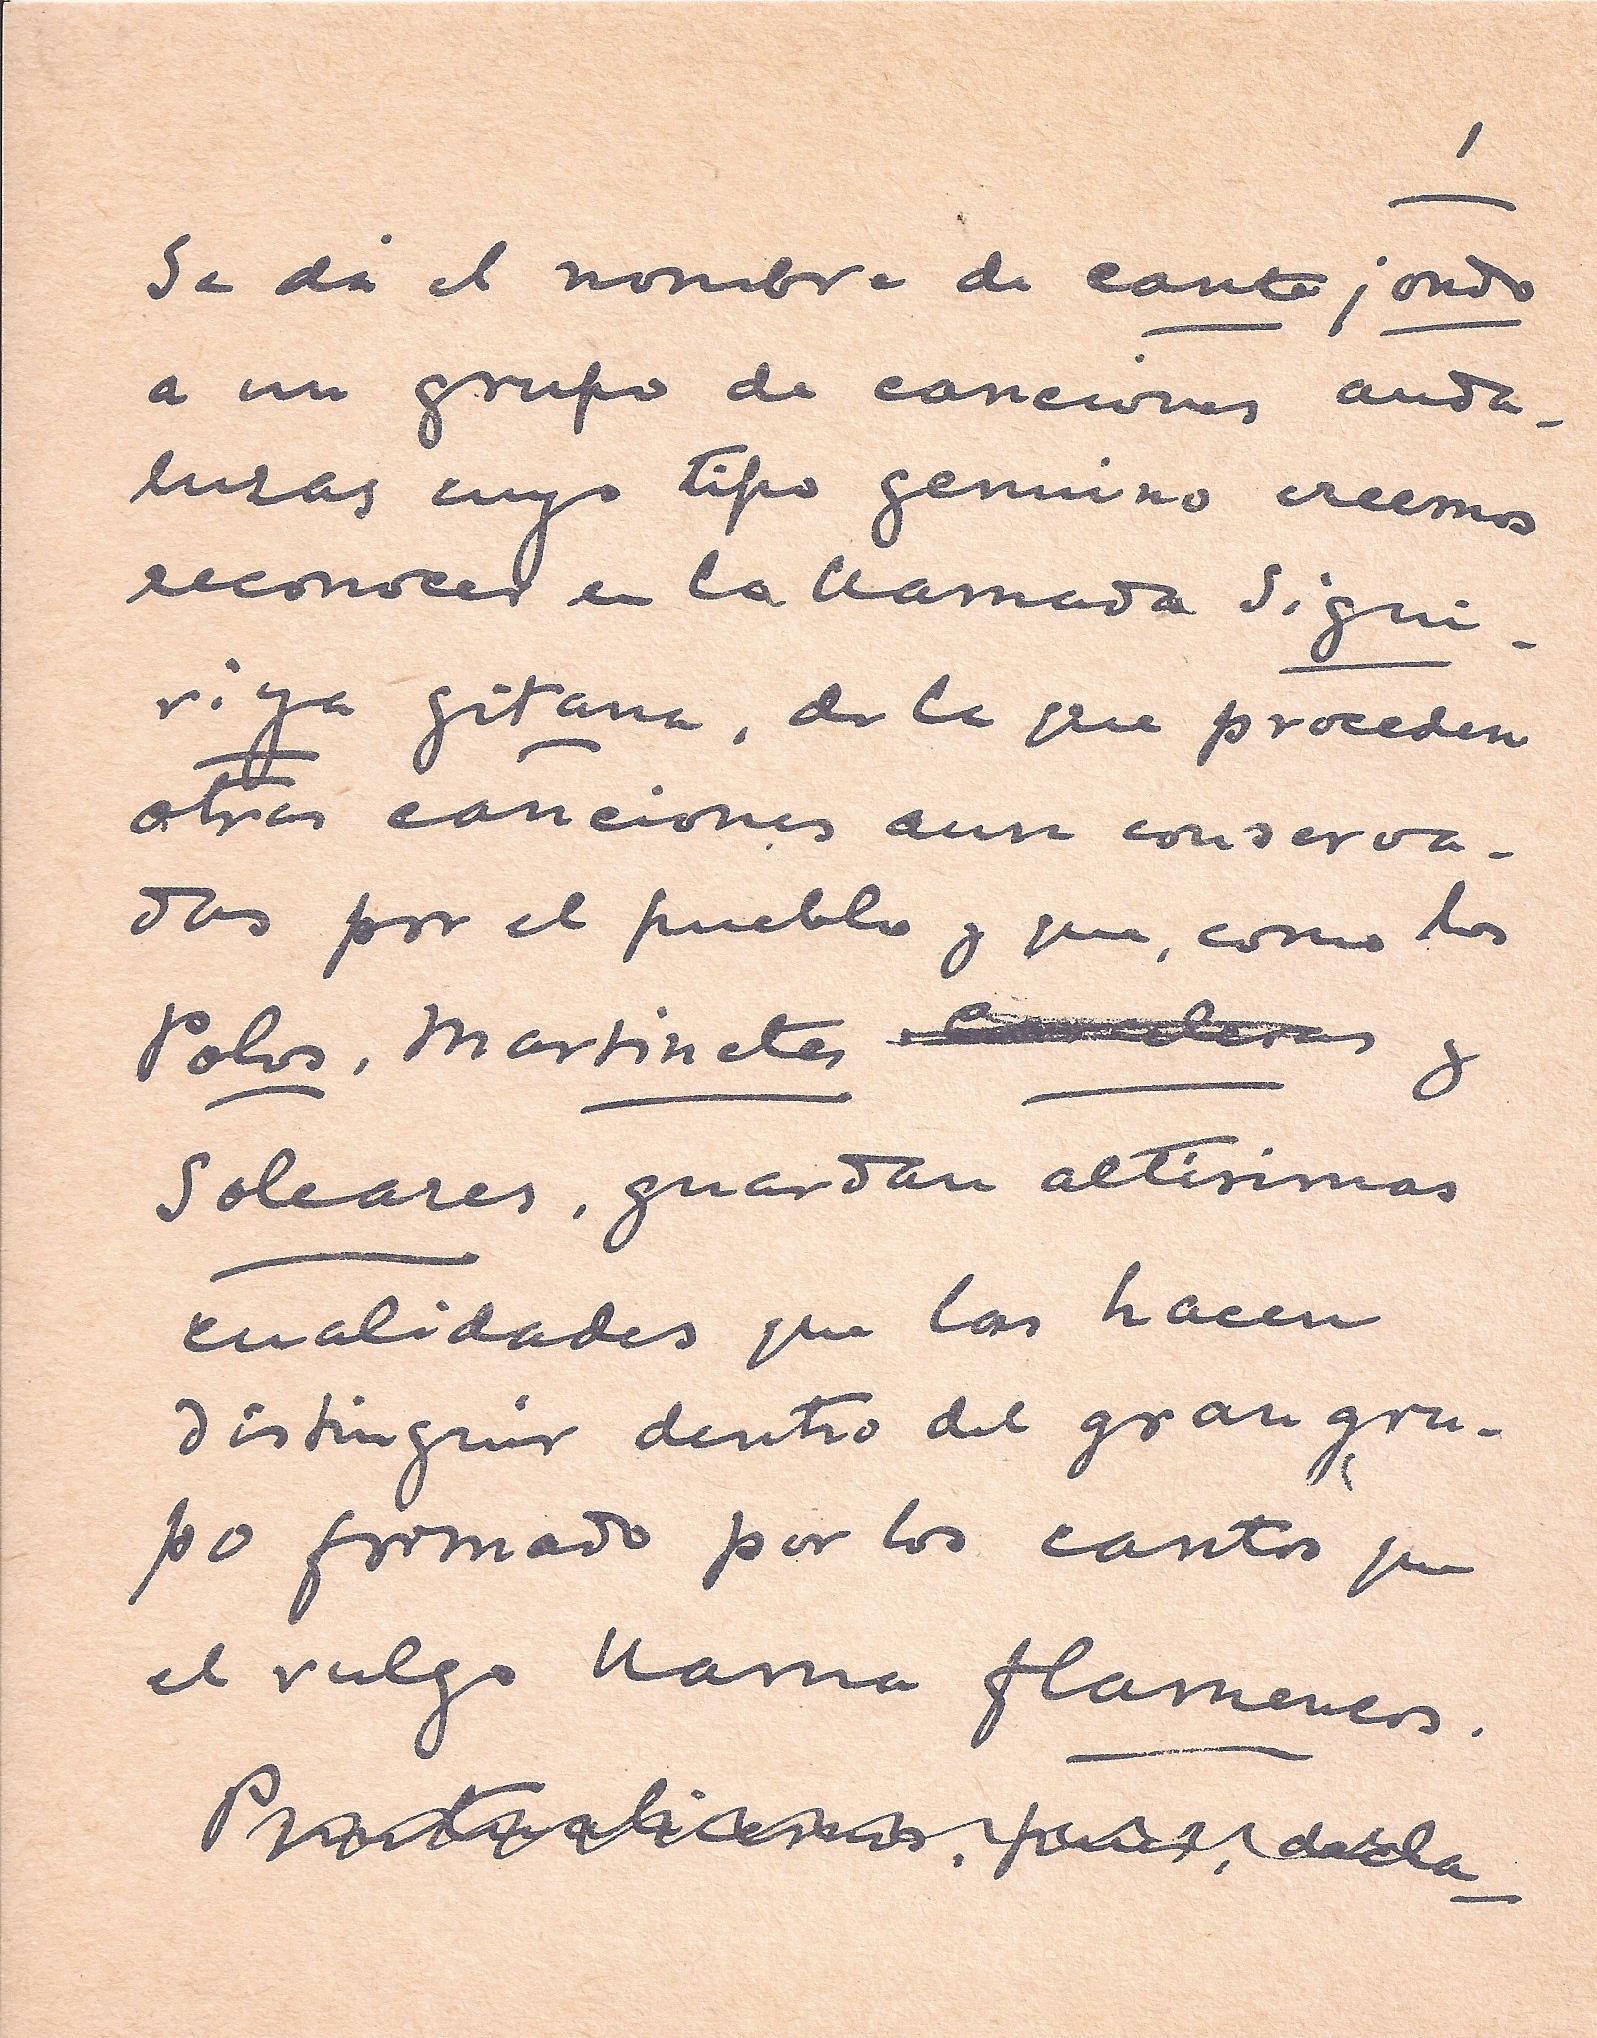 First handwritten page of Manuel de Falla’s article on the Deep Song.